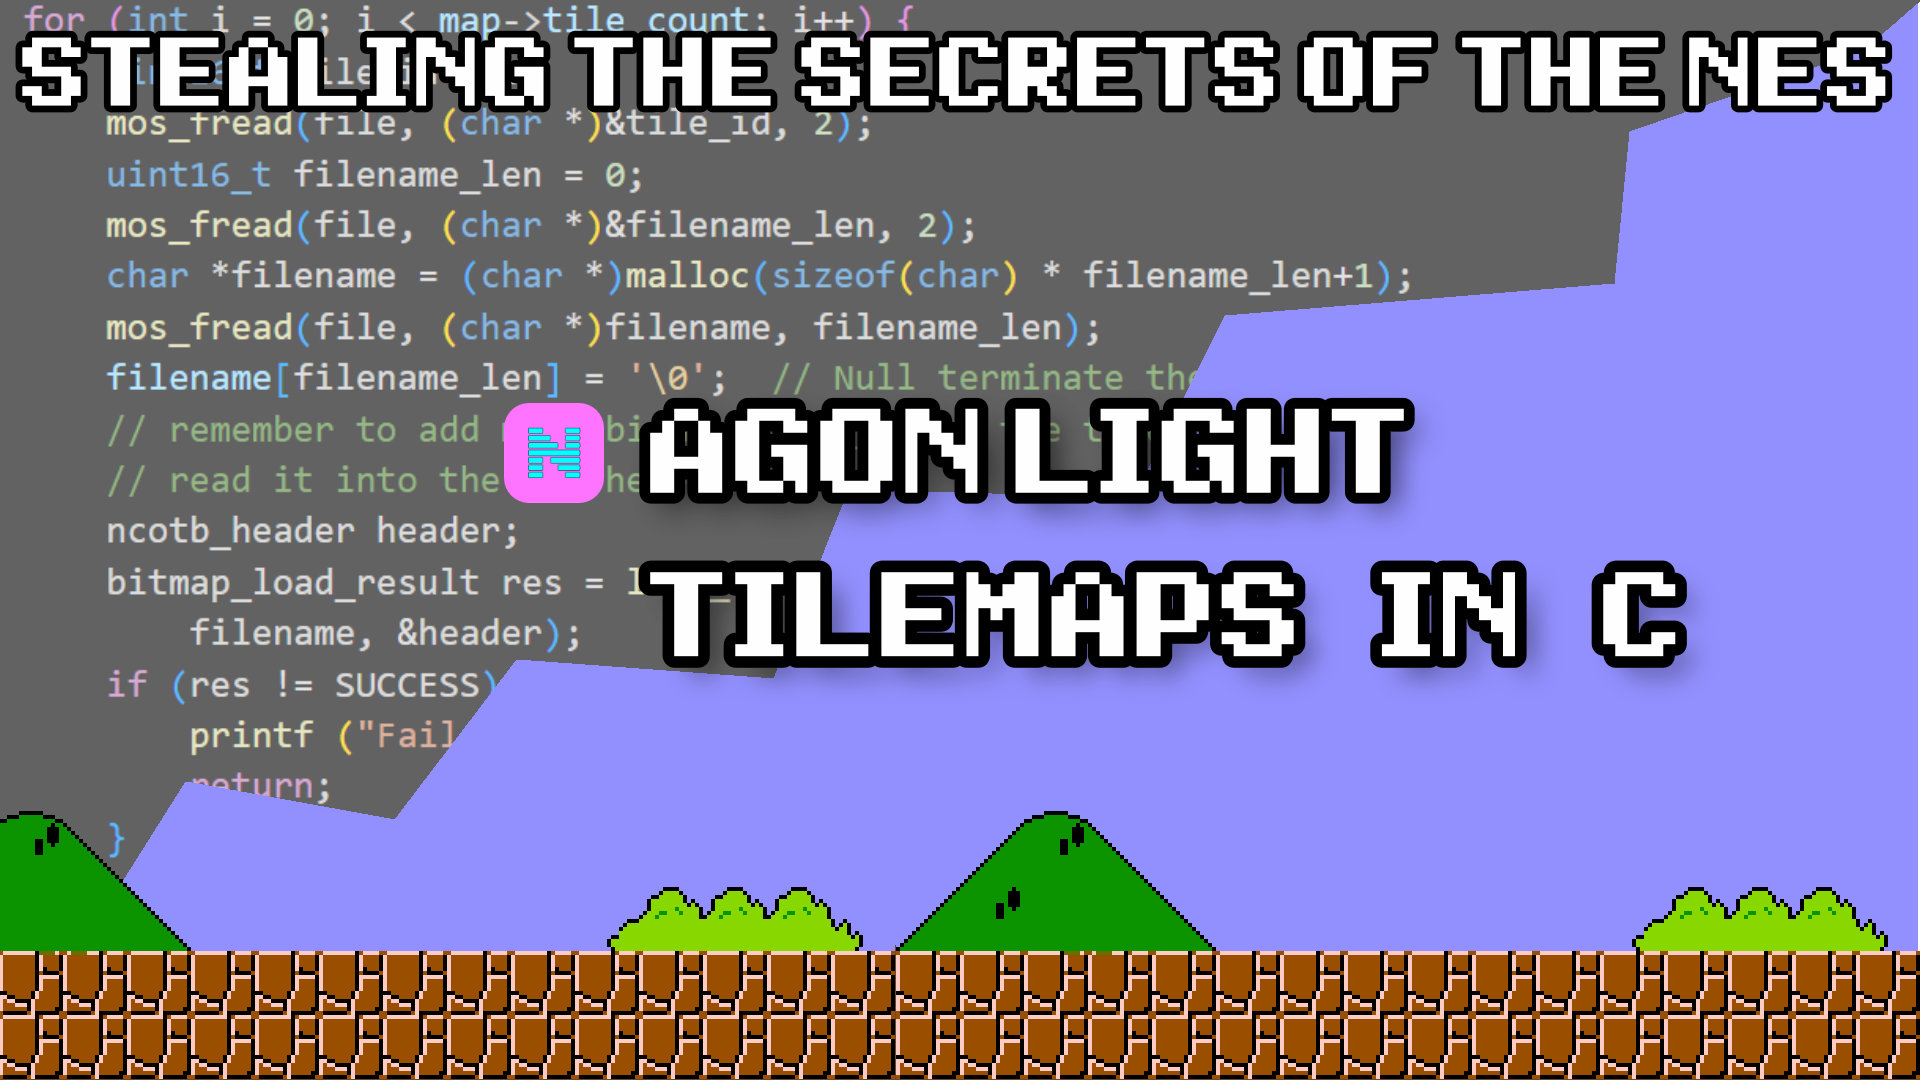 Stealing the Secrets of the NES – Agon Light Tilemaps in C